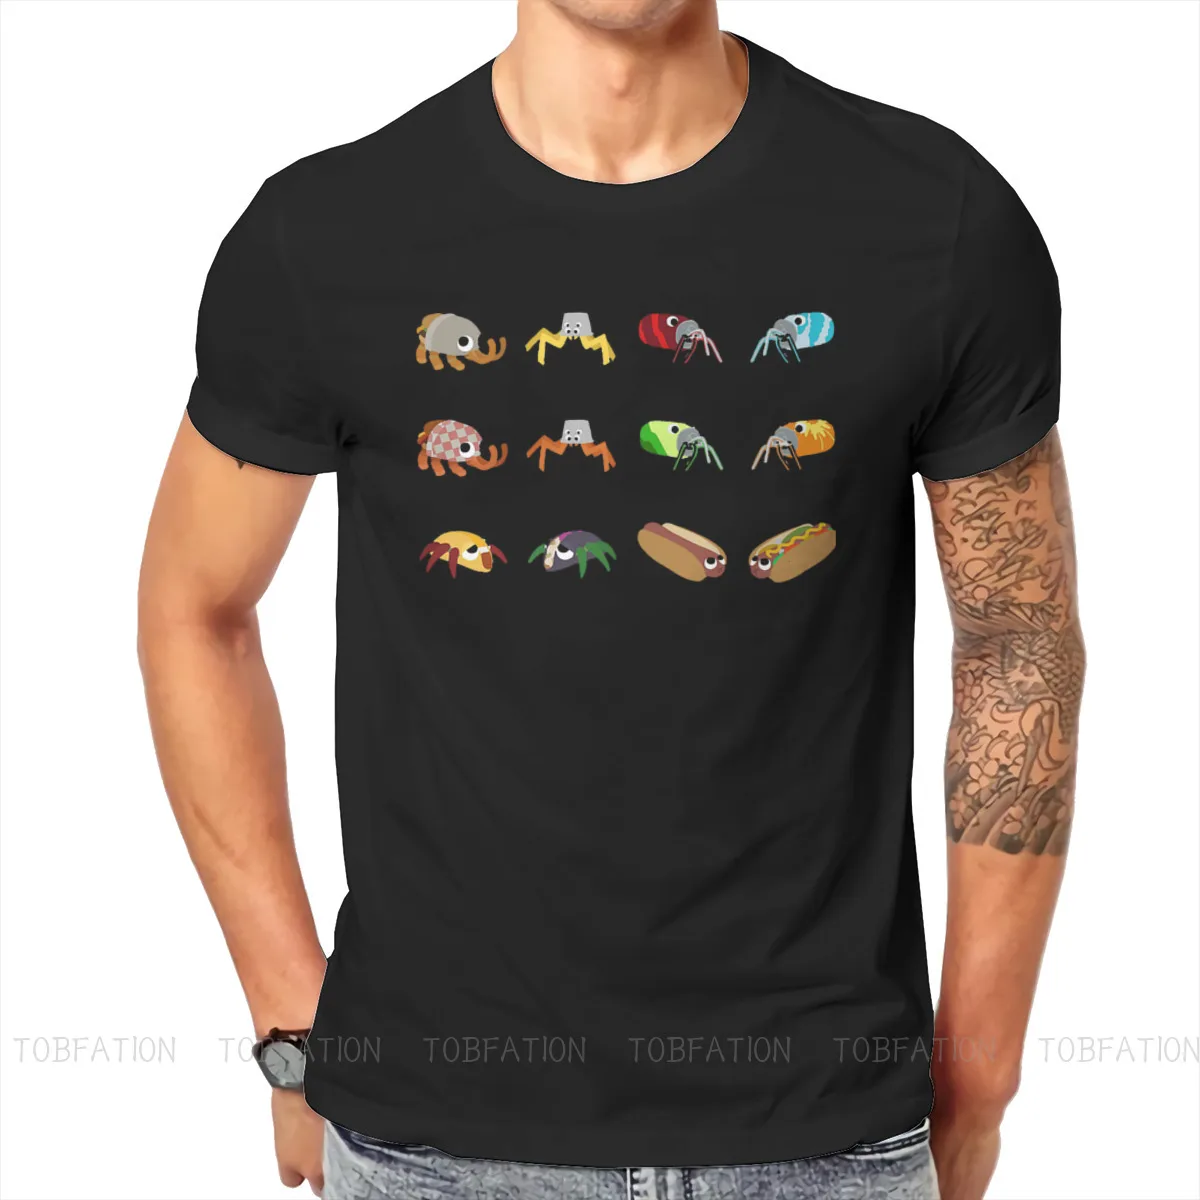 Fast Food Pack Newest TShirts Bugsnax Men Graphic Fabric Streetwear T Shirt Round Neck Oversized